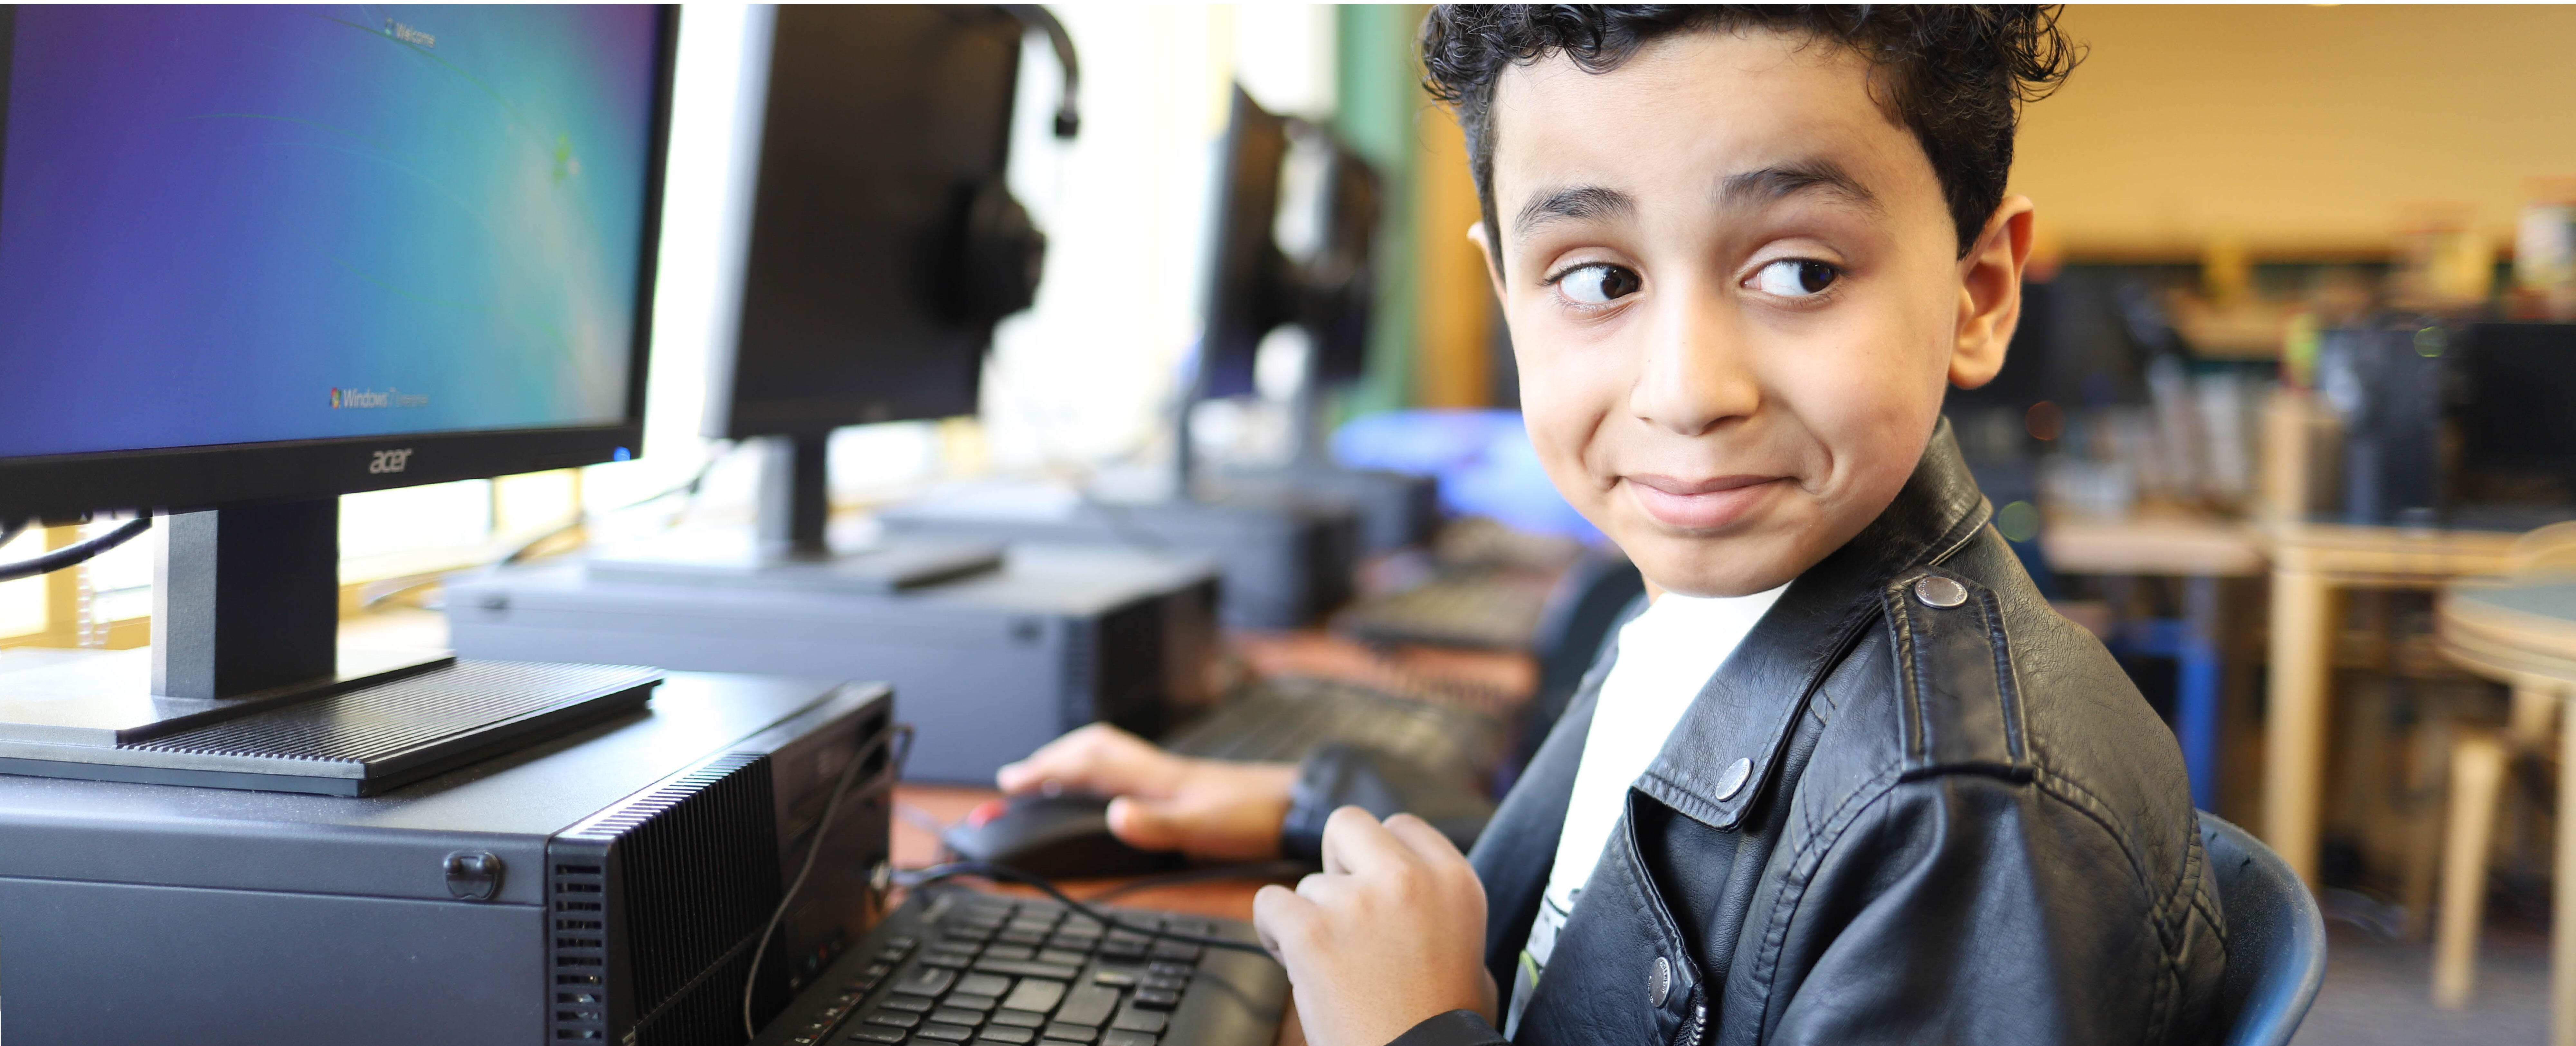 Student smiling while working on a computer